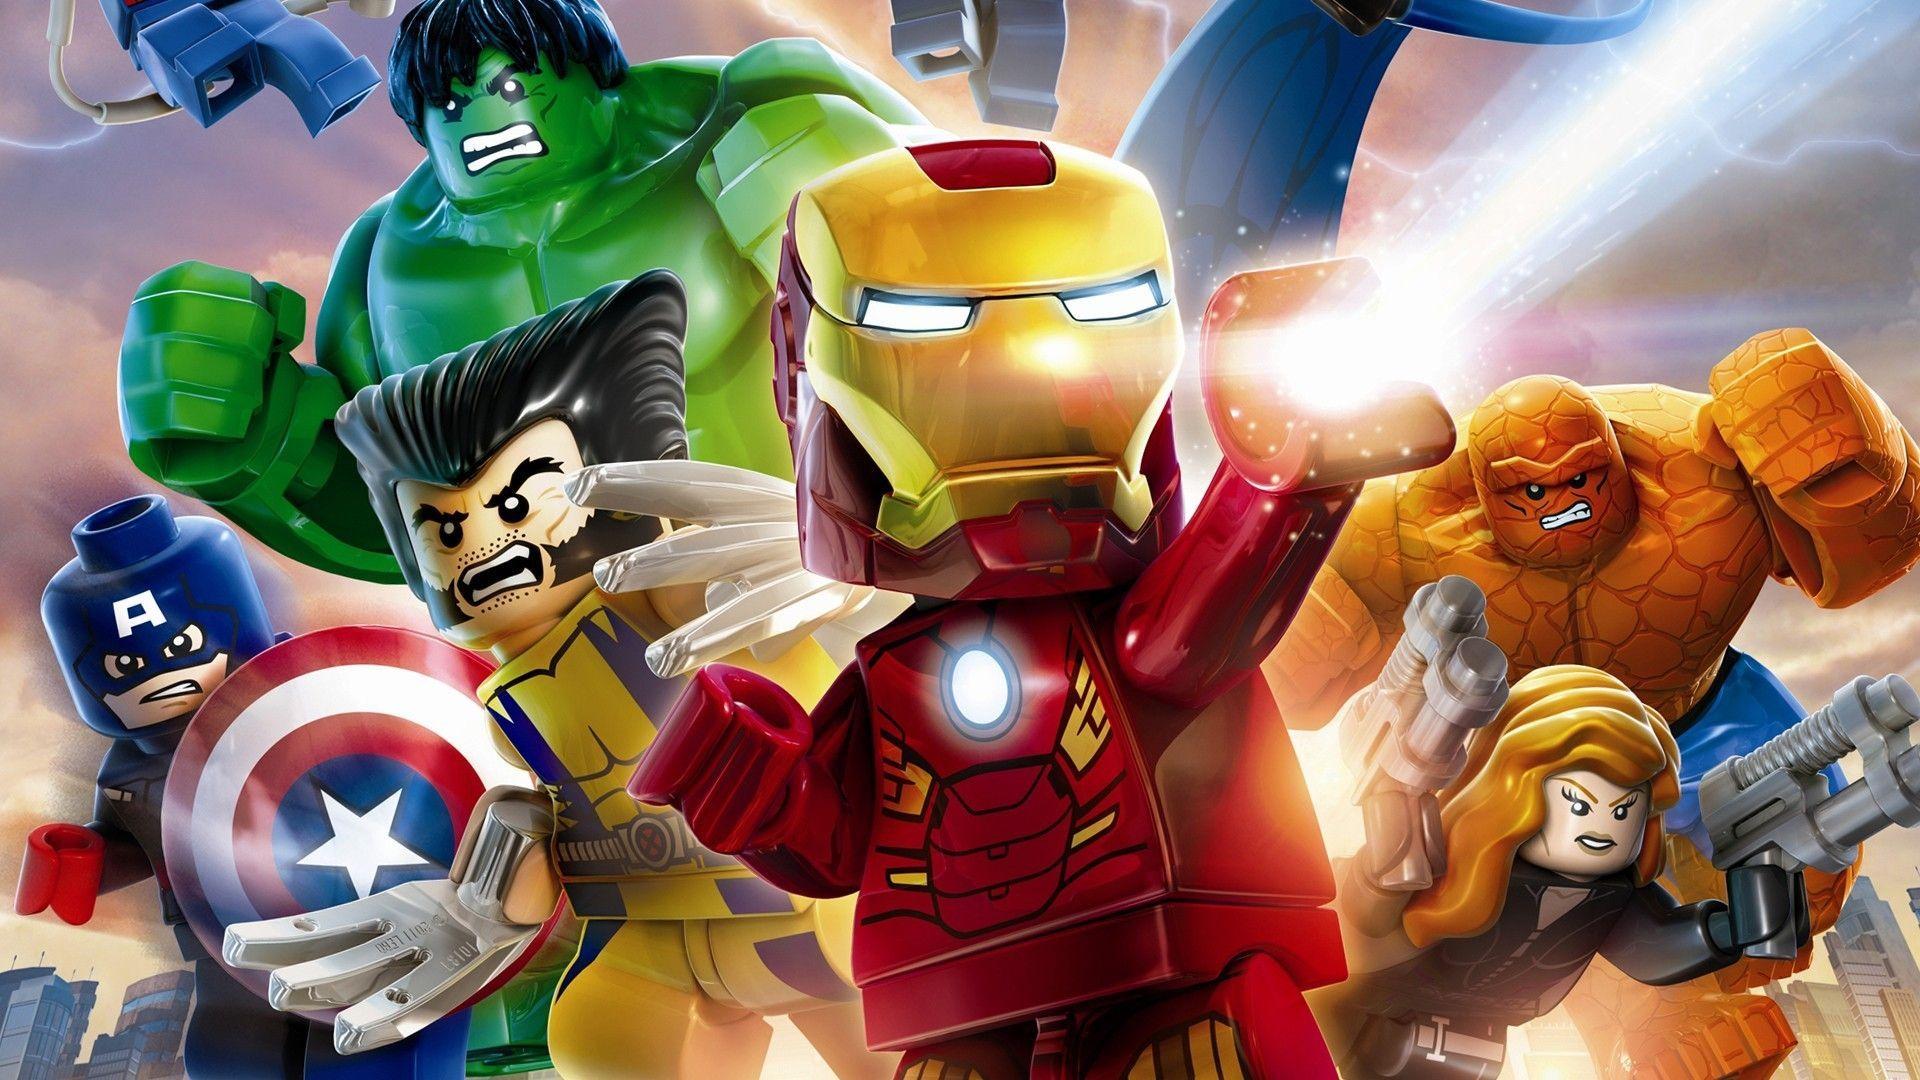 Video Game Lego Marvel Super Heroes Wallpaper 1920x1080 px Free